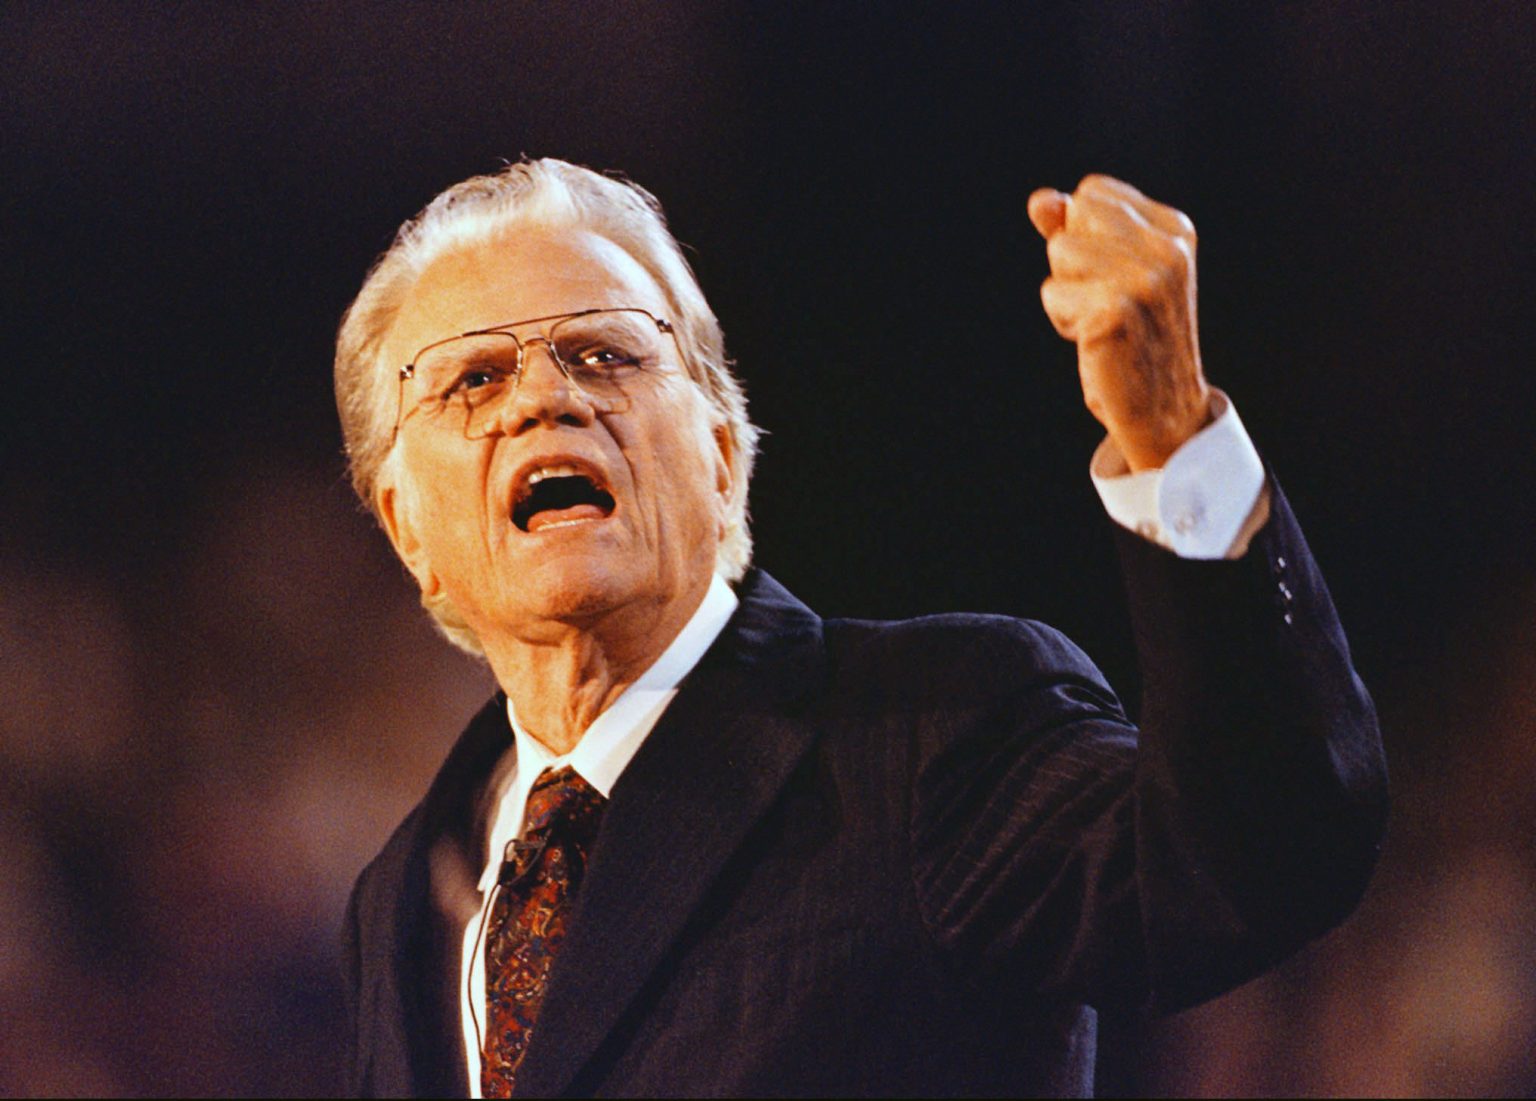 DOWNLOAD MP3: When God Gets Your Attention by Evangelist BILLY GRAHAM (Sermon) 1